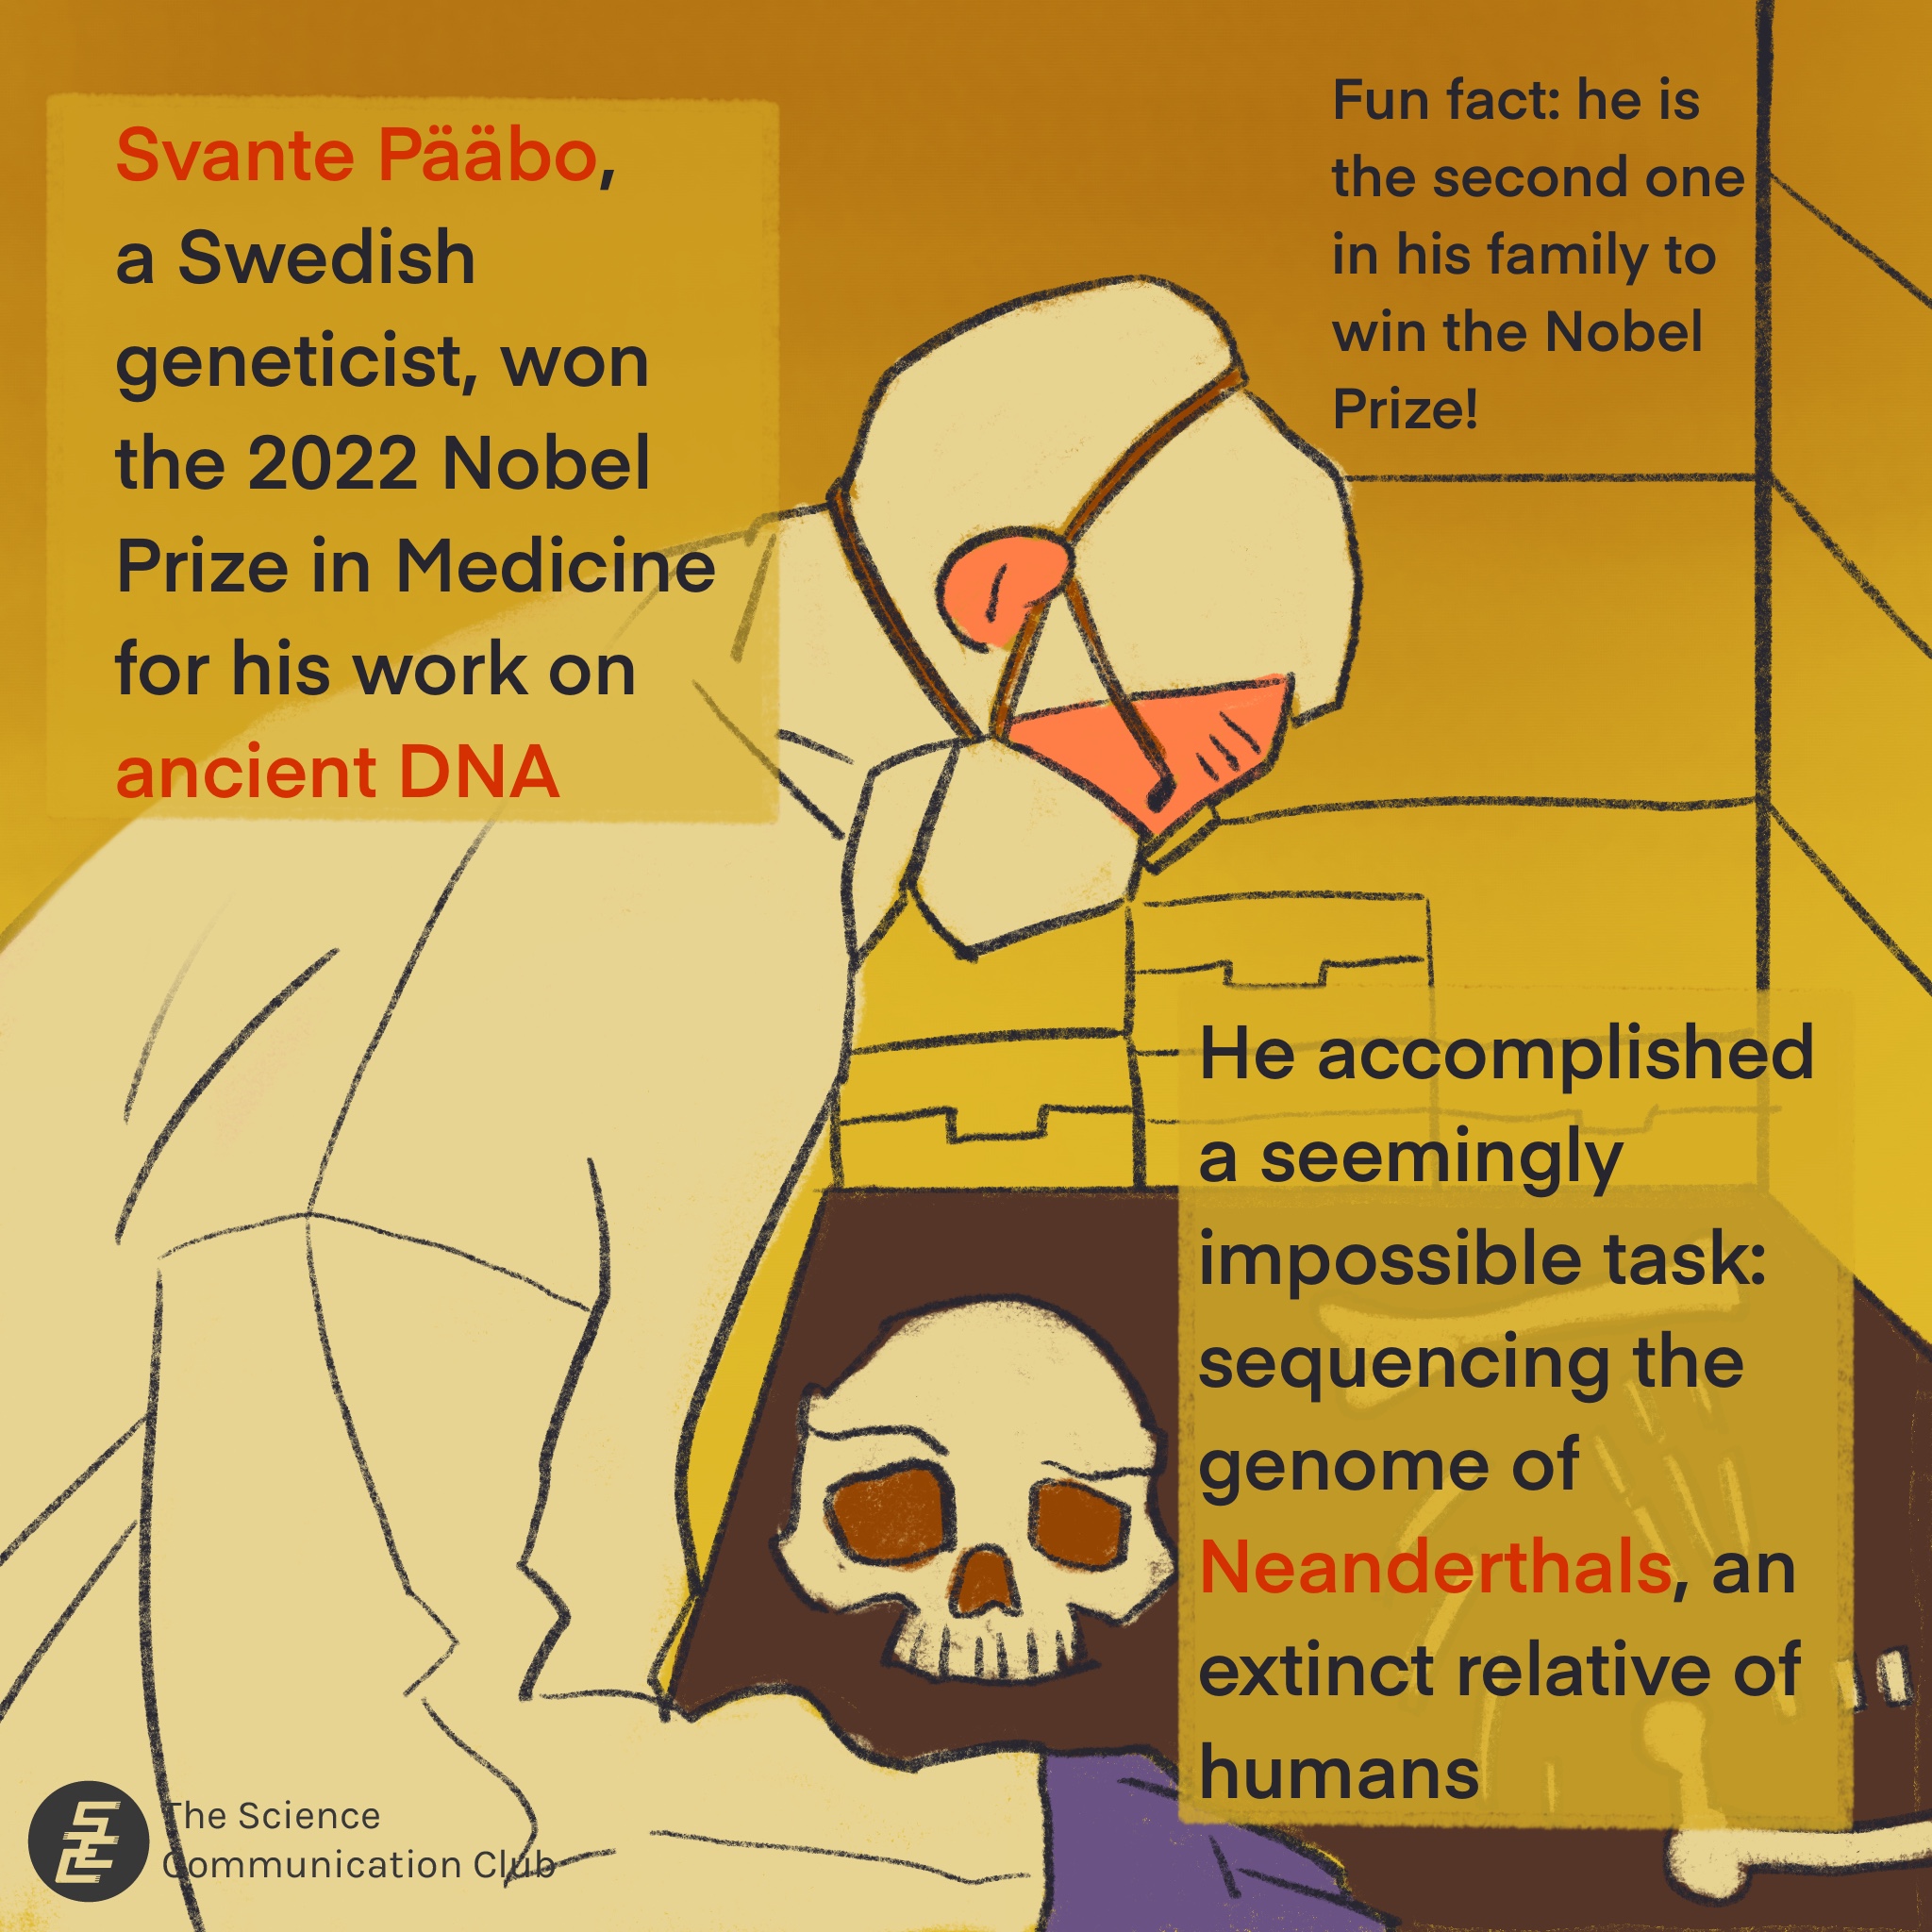 An illustration of a scientist studying archaeological examples in a laboratory. Text: Svante Pääbo, a Swedish geneticist, won the 2022 Nobel Prize in Medicine for his work on ancient DNA. Fun fact: he is the second one in his family to win the Nobel Prize. He accomplished a seemingly impossible task: sequencing the genome of Neanderthals, an extinct relative of human.